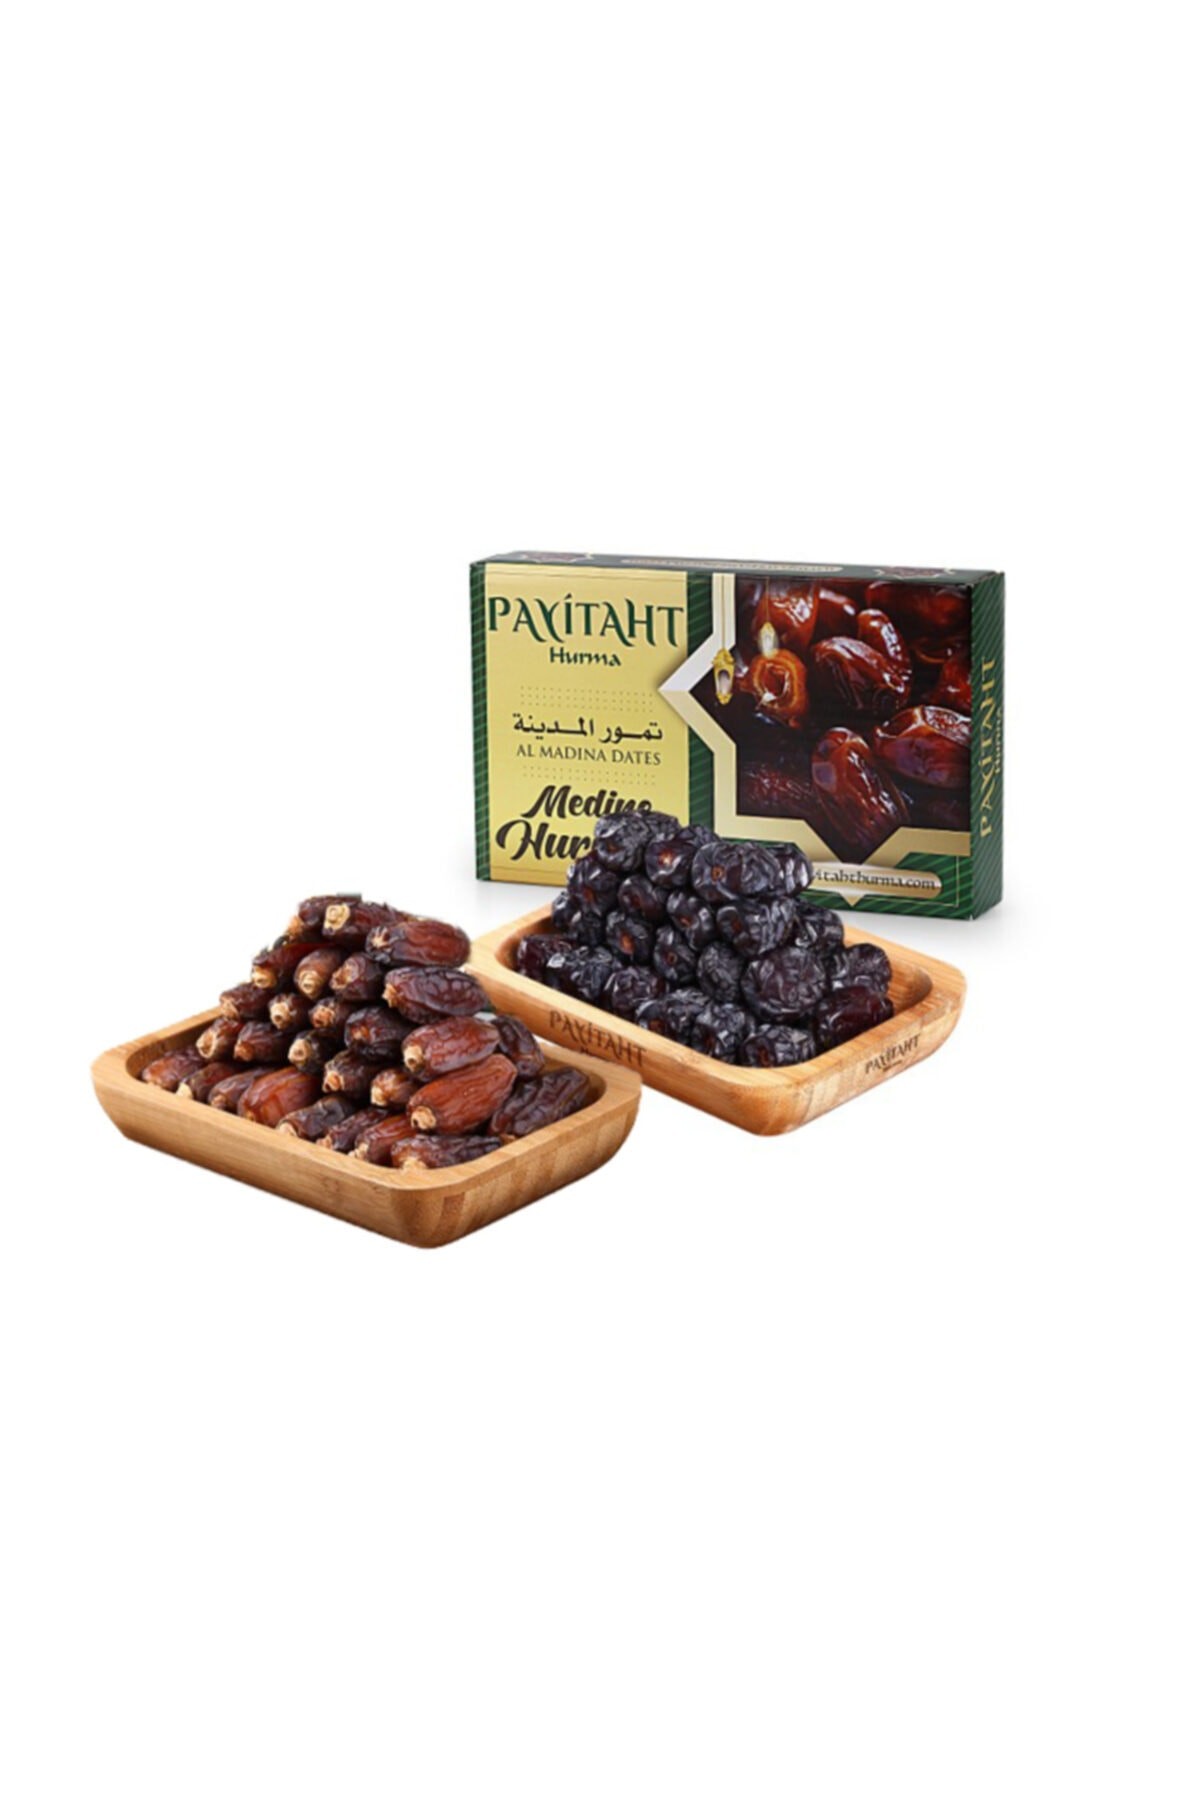 PAYITAHT DATE- MEDINA MEBRUM DOUBLE AND ACVE DOUBLE 1 KG PACKAGE- NEW HARVEST